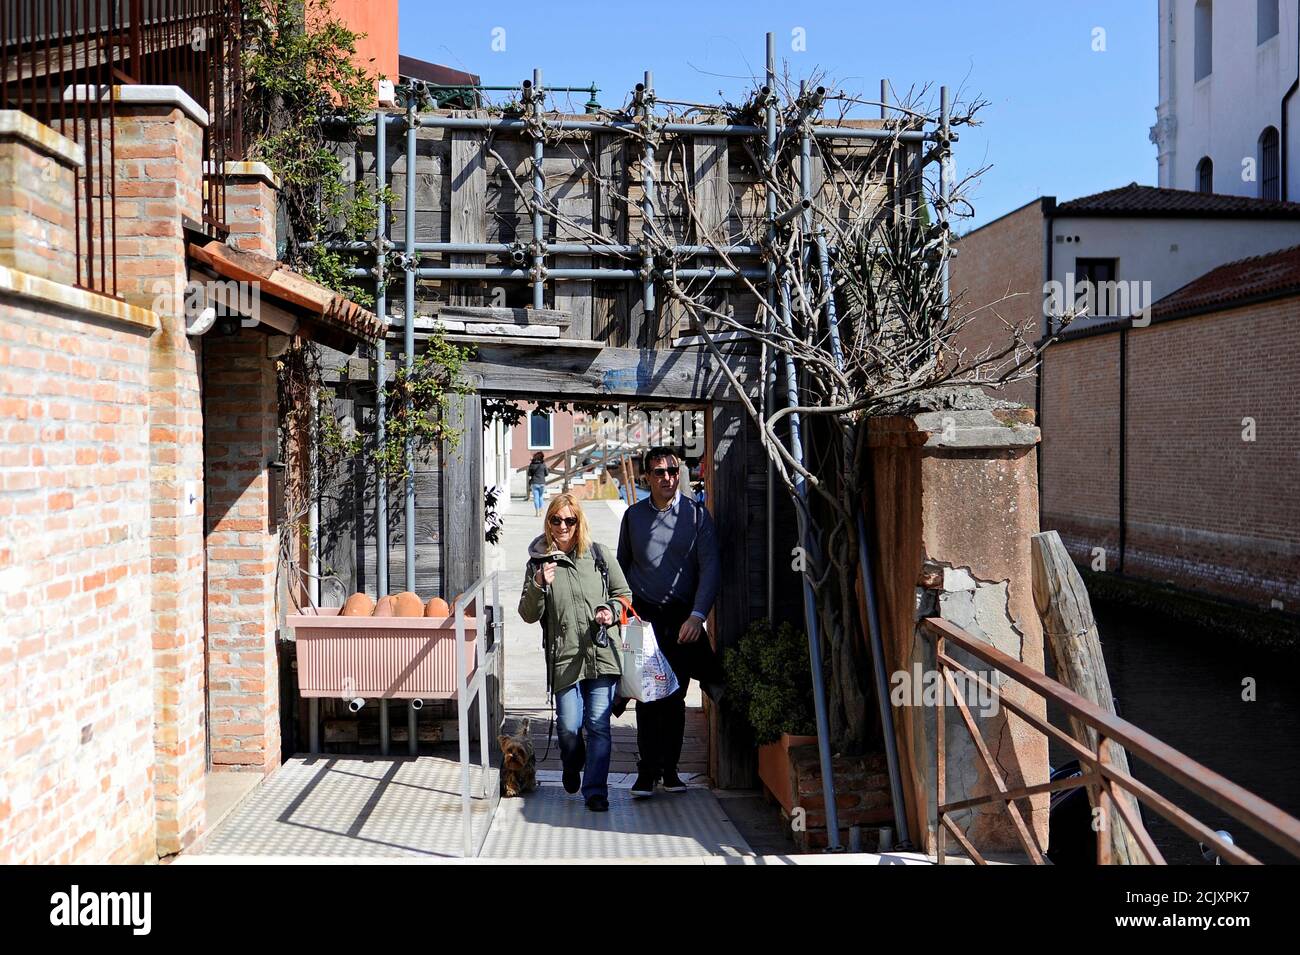 Patrizia Zaniol, 56, and spokesman of Social Assembly for the House (ASC) Nicola Ussardi, 41, who both live in illegally occupied apartments walk through the only entrance by land to the Casette neighbourhood where about 20 apartments are illegally occupied, in Venice, Italy, April 1, 2019. "If the police try to enter the neighborhood by land we'll block the passage. We are prepared to do anything to defend our apartments, even physical confrontation", Ussardi said. Picture taken April 1, 2019. REUTERS/Guglielmo Mangiapane Stock Photo